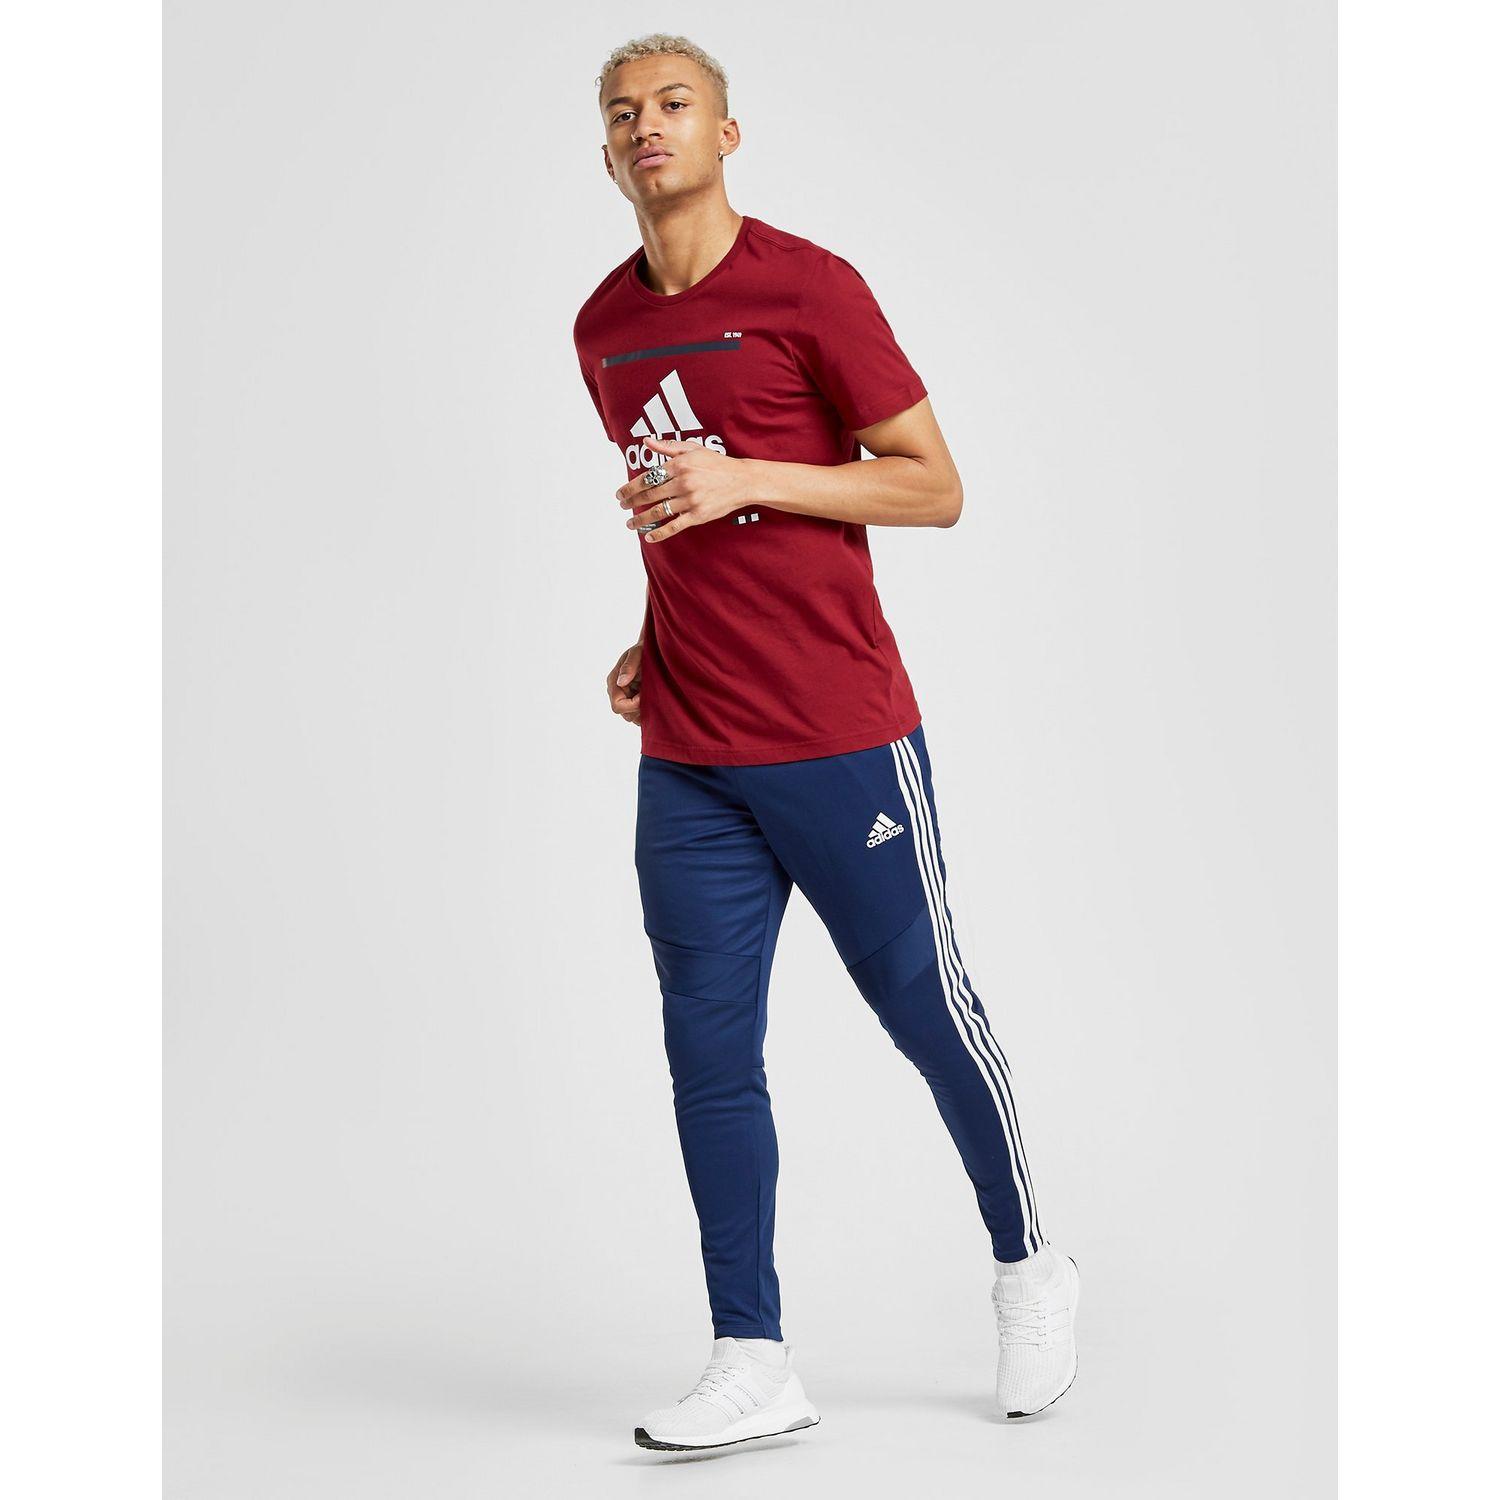 adidas Synthetic Tiro 19 Training Pants in Navy/White (Blue) for Men - Lyst